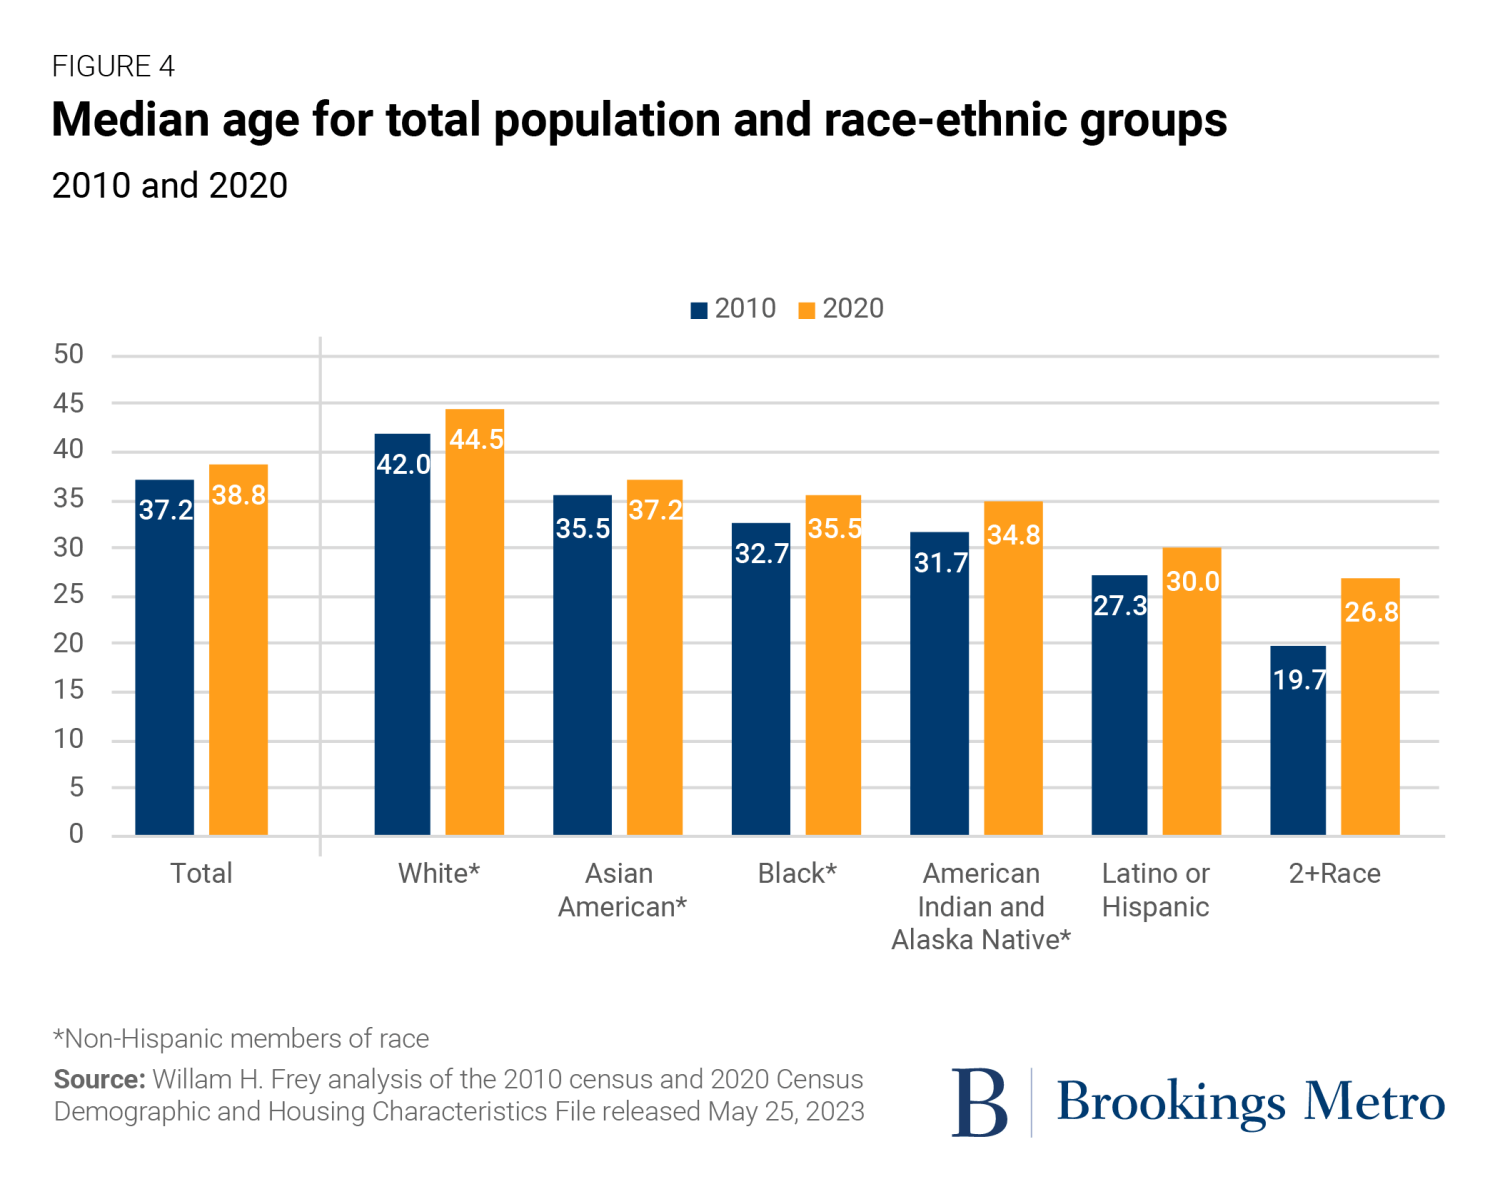 Figure 4: Median age for total population and race-ethnic groups